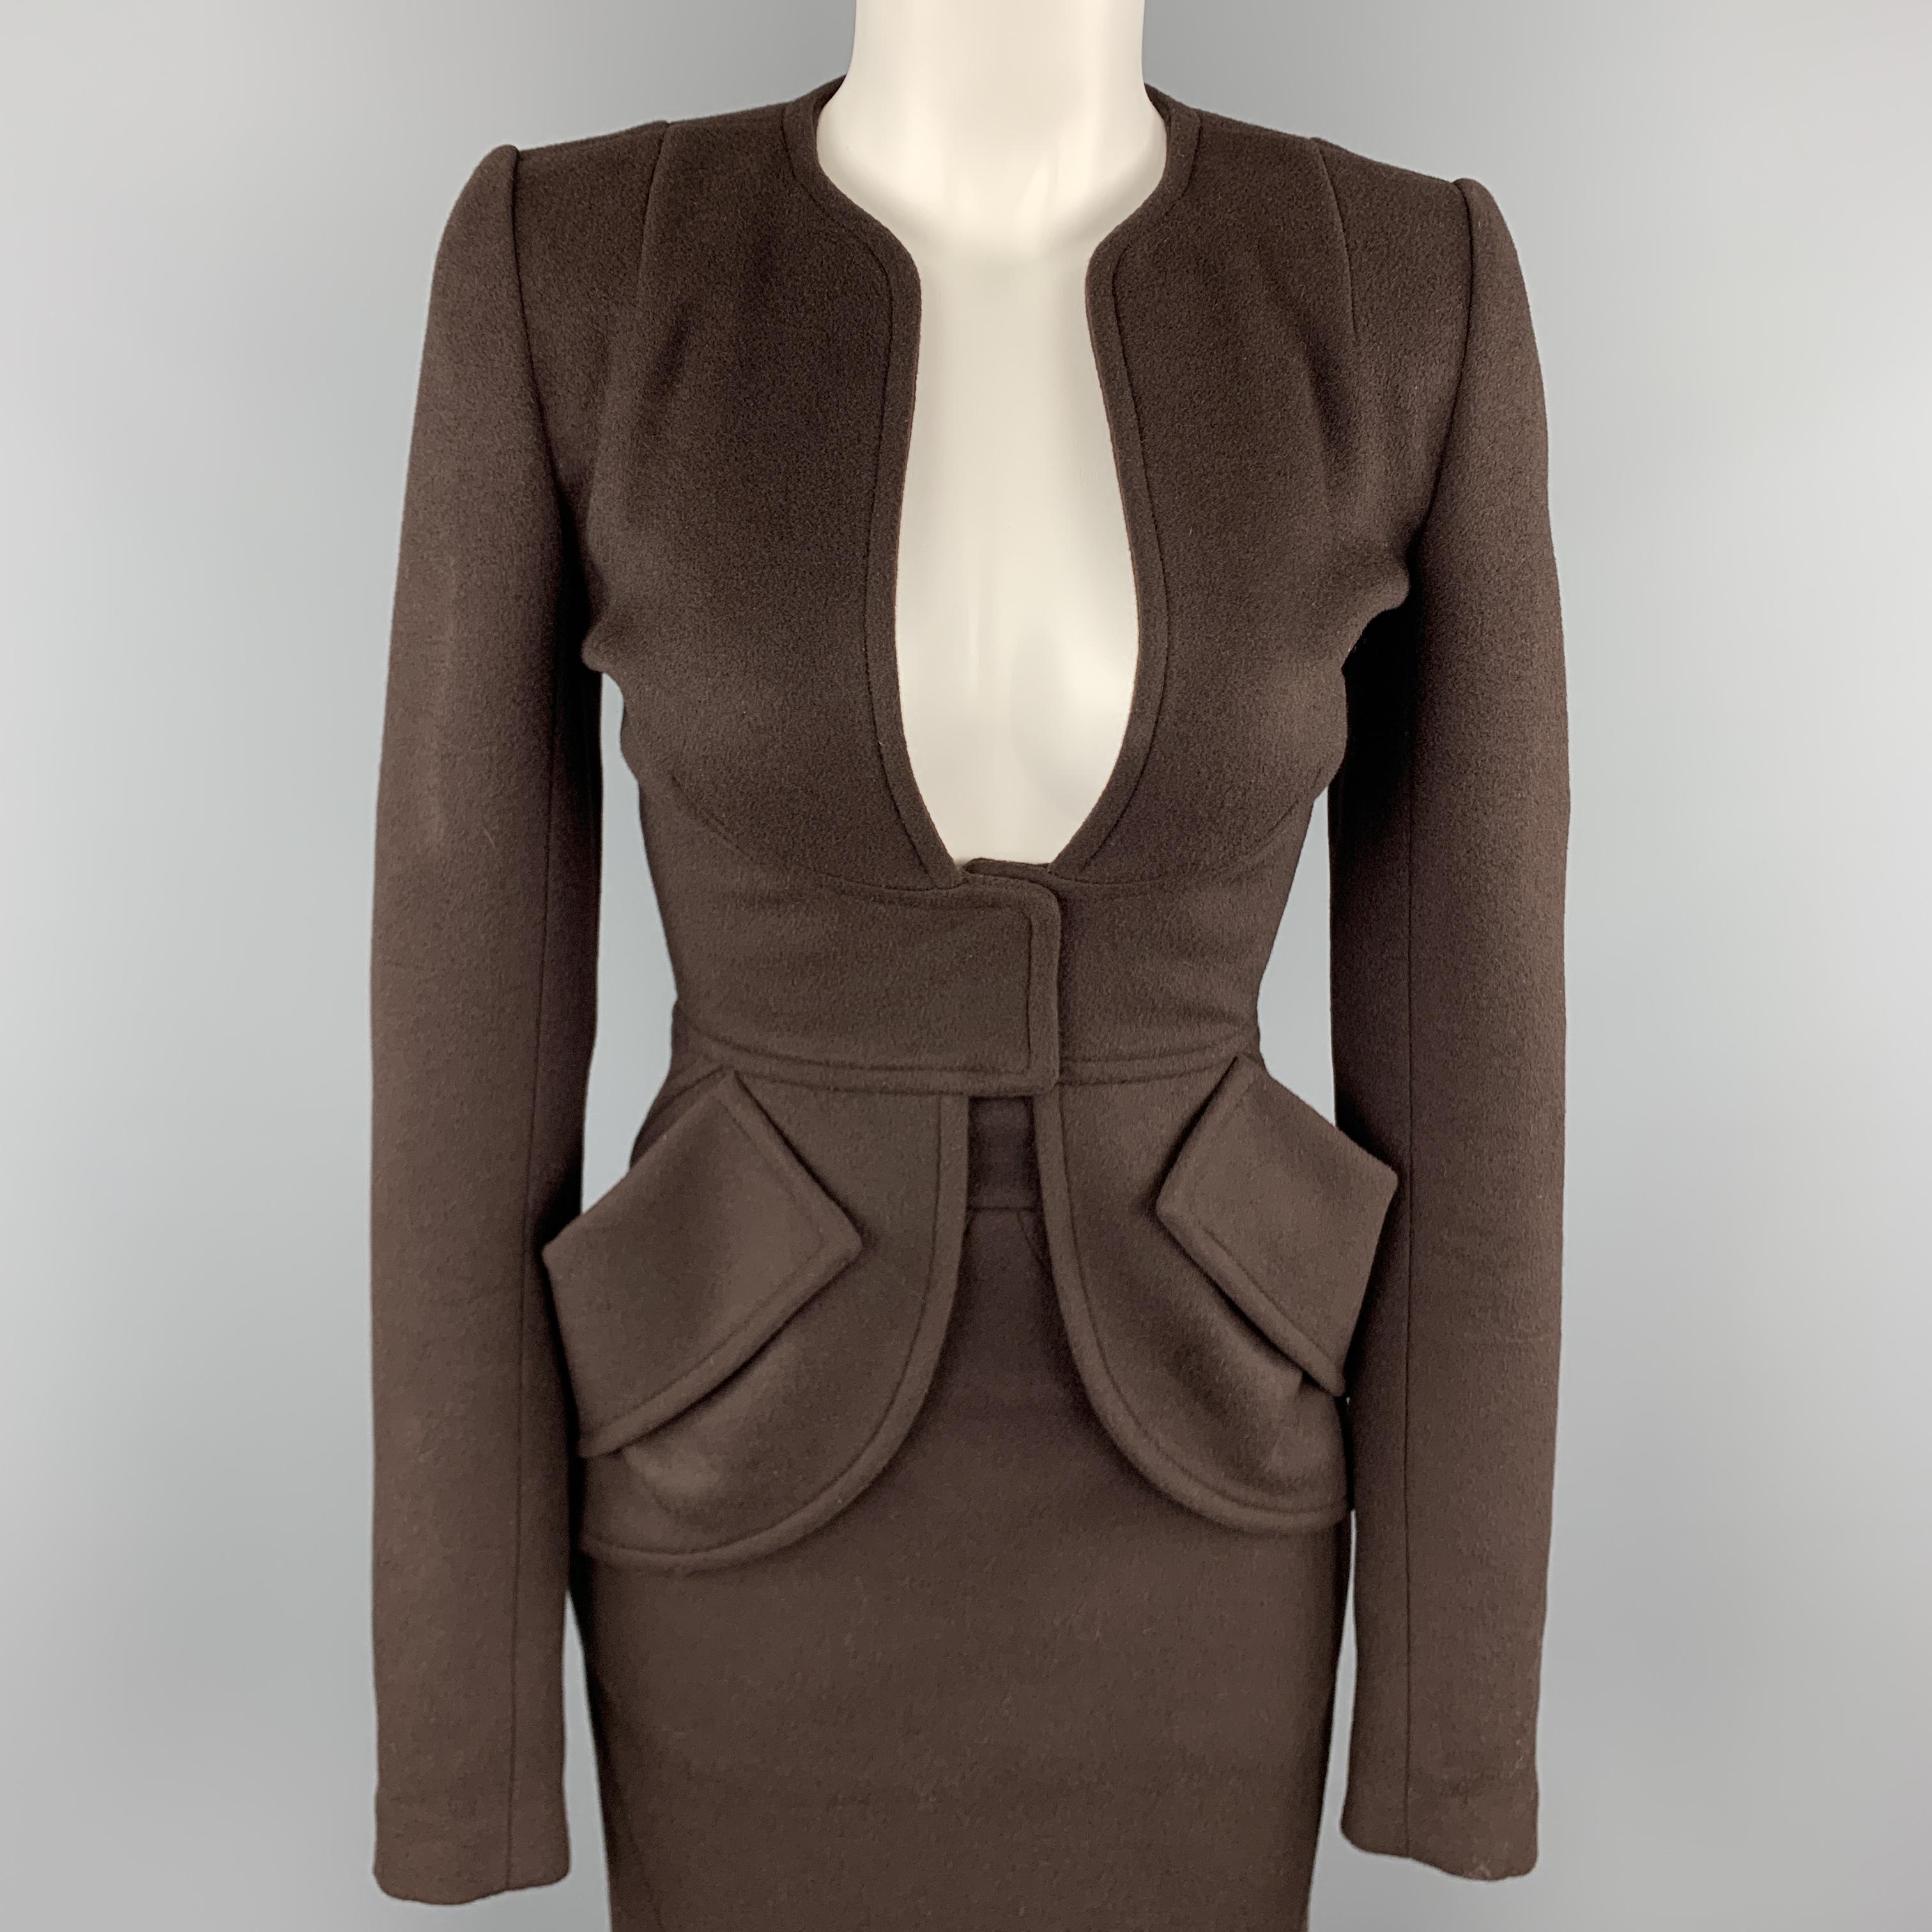 ZAC POSEN 1940's inspired suit comes in brown felt and includes a collarless, plunge neck jacket and matching fishtail back midi pencil skirt. Made in USA.

Very Good Pre-Owned Condition.
Marked: 2 in.

Measurements:

-Jacket
Shoulder: 14 in.
Bust: